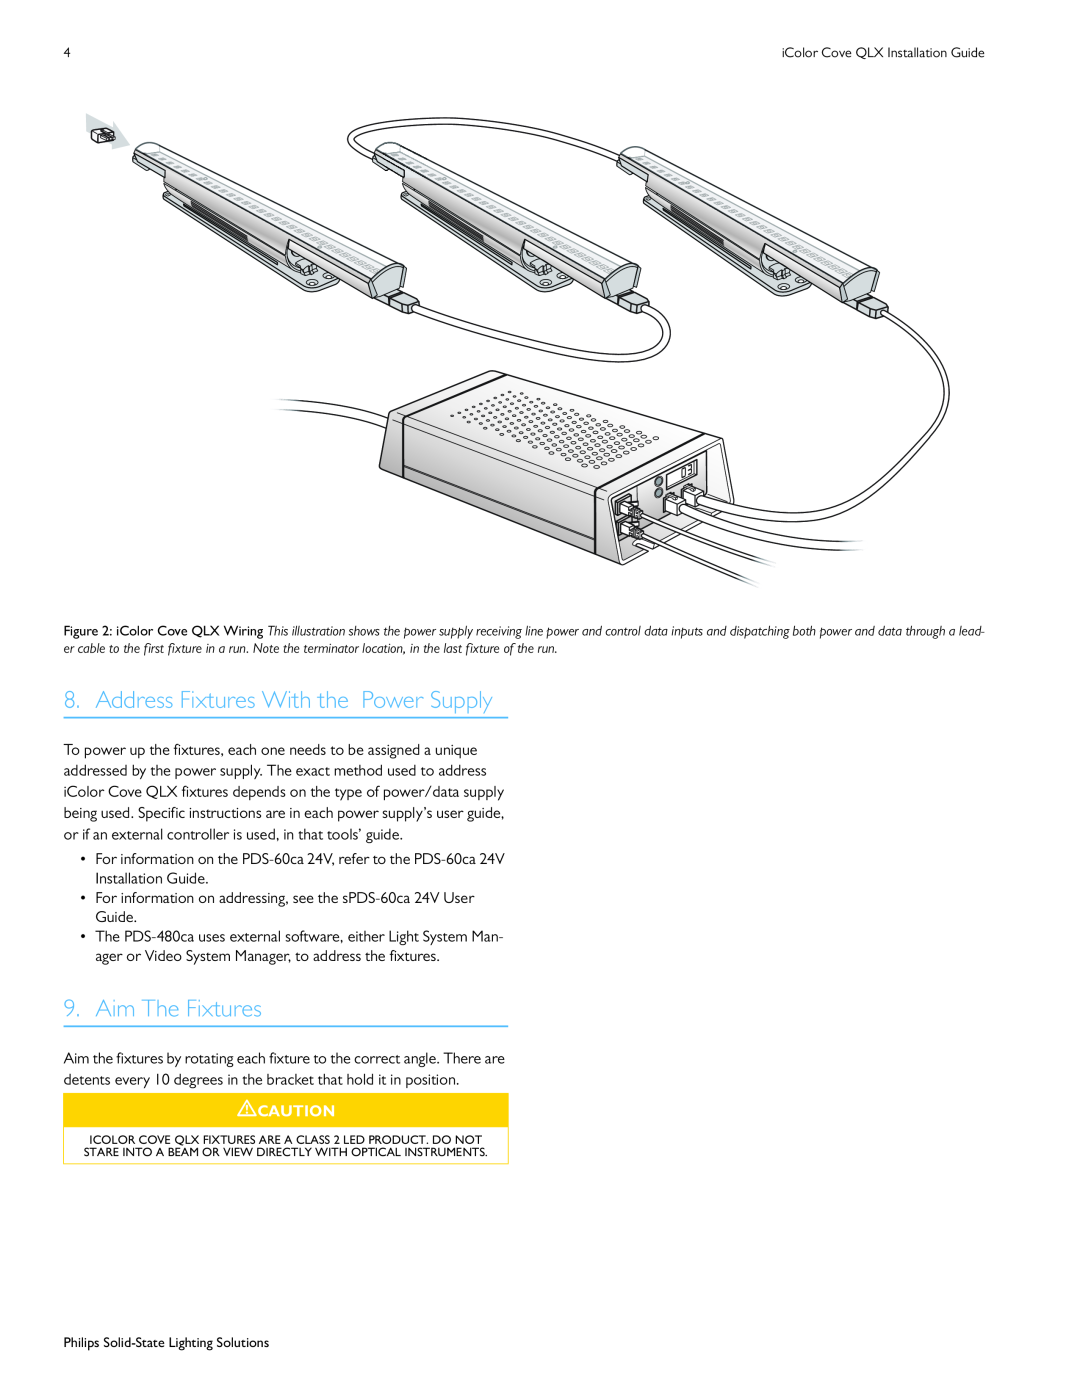 Philips manual Address Fixtures With the Power Supply, Aim The Fixtures, iColor Cove QLX Installation Guide 